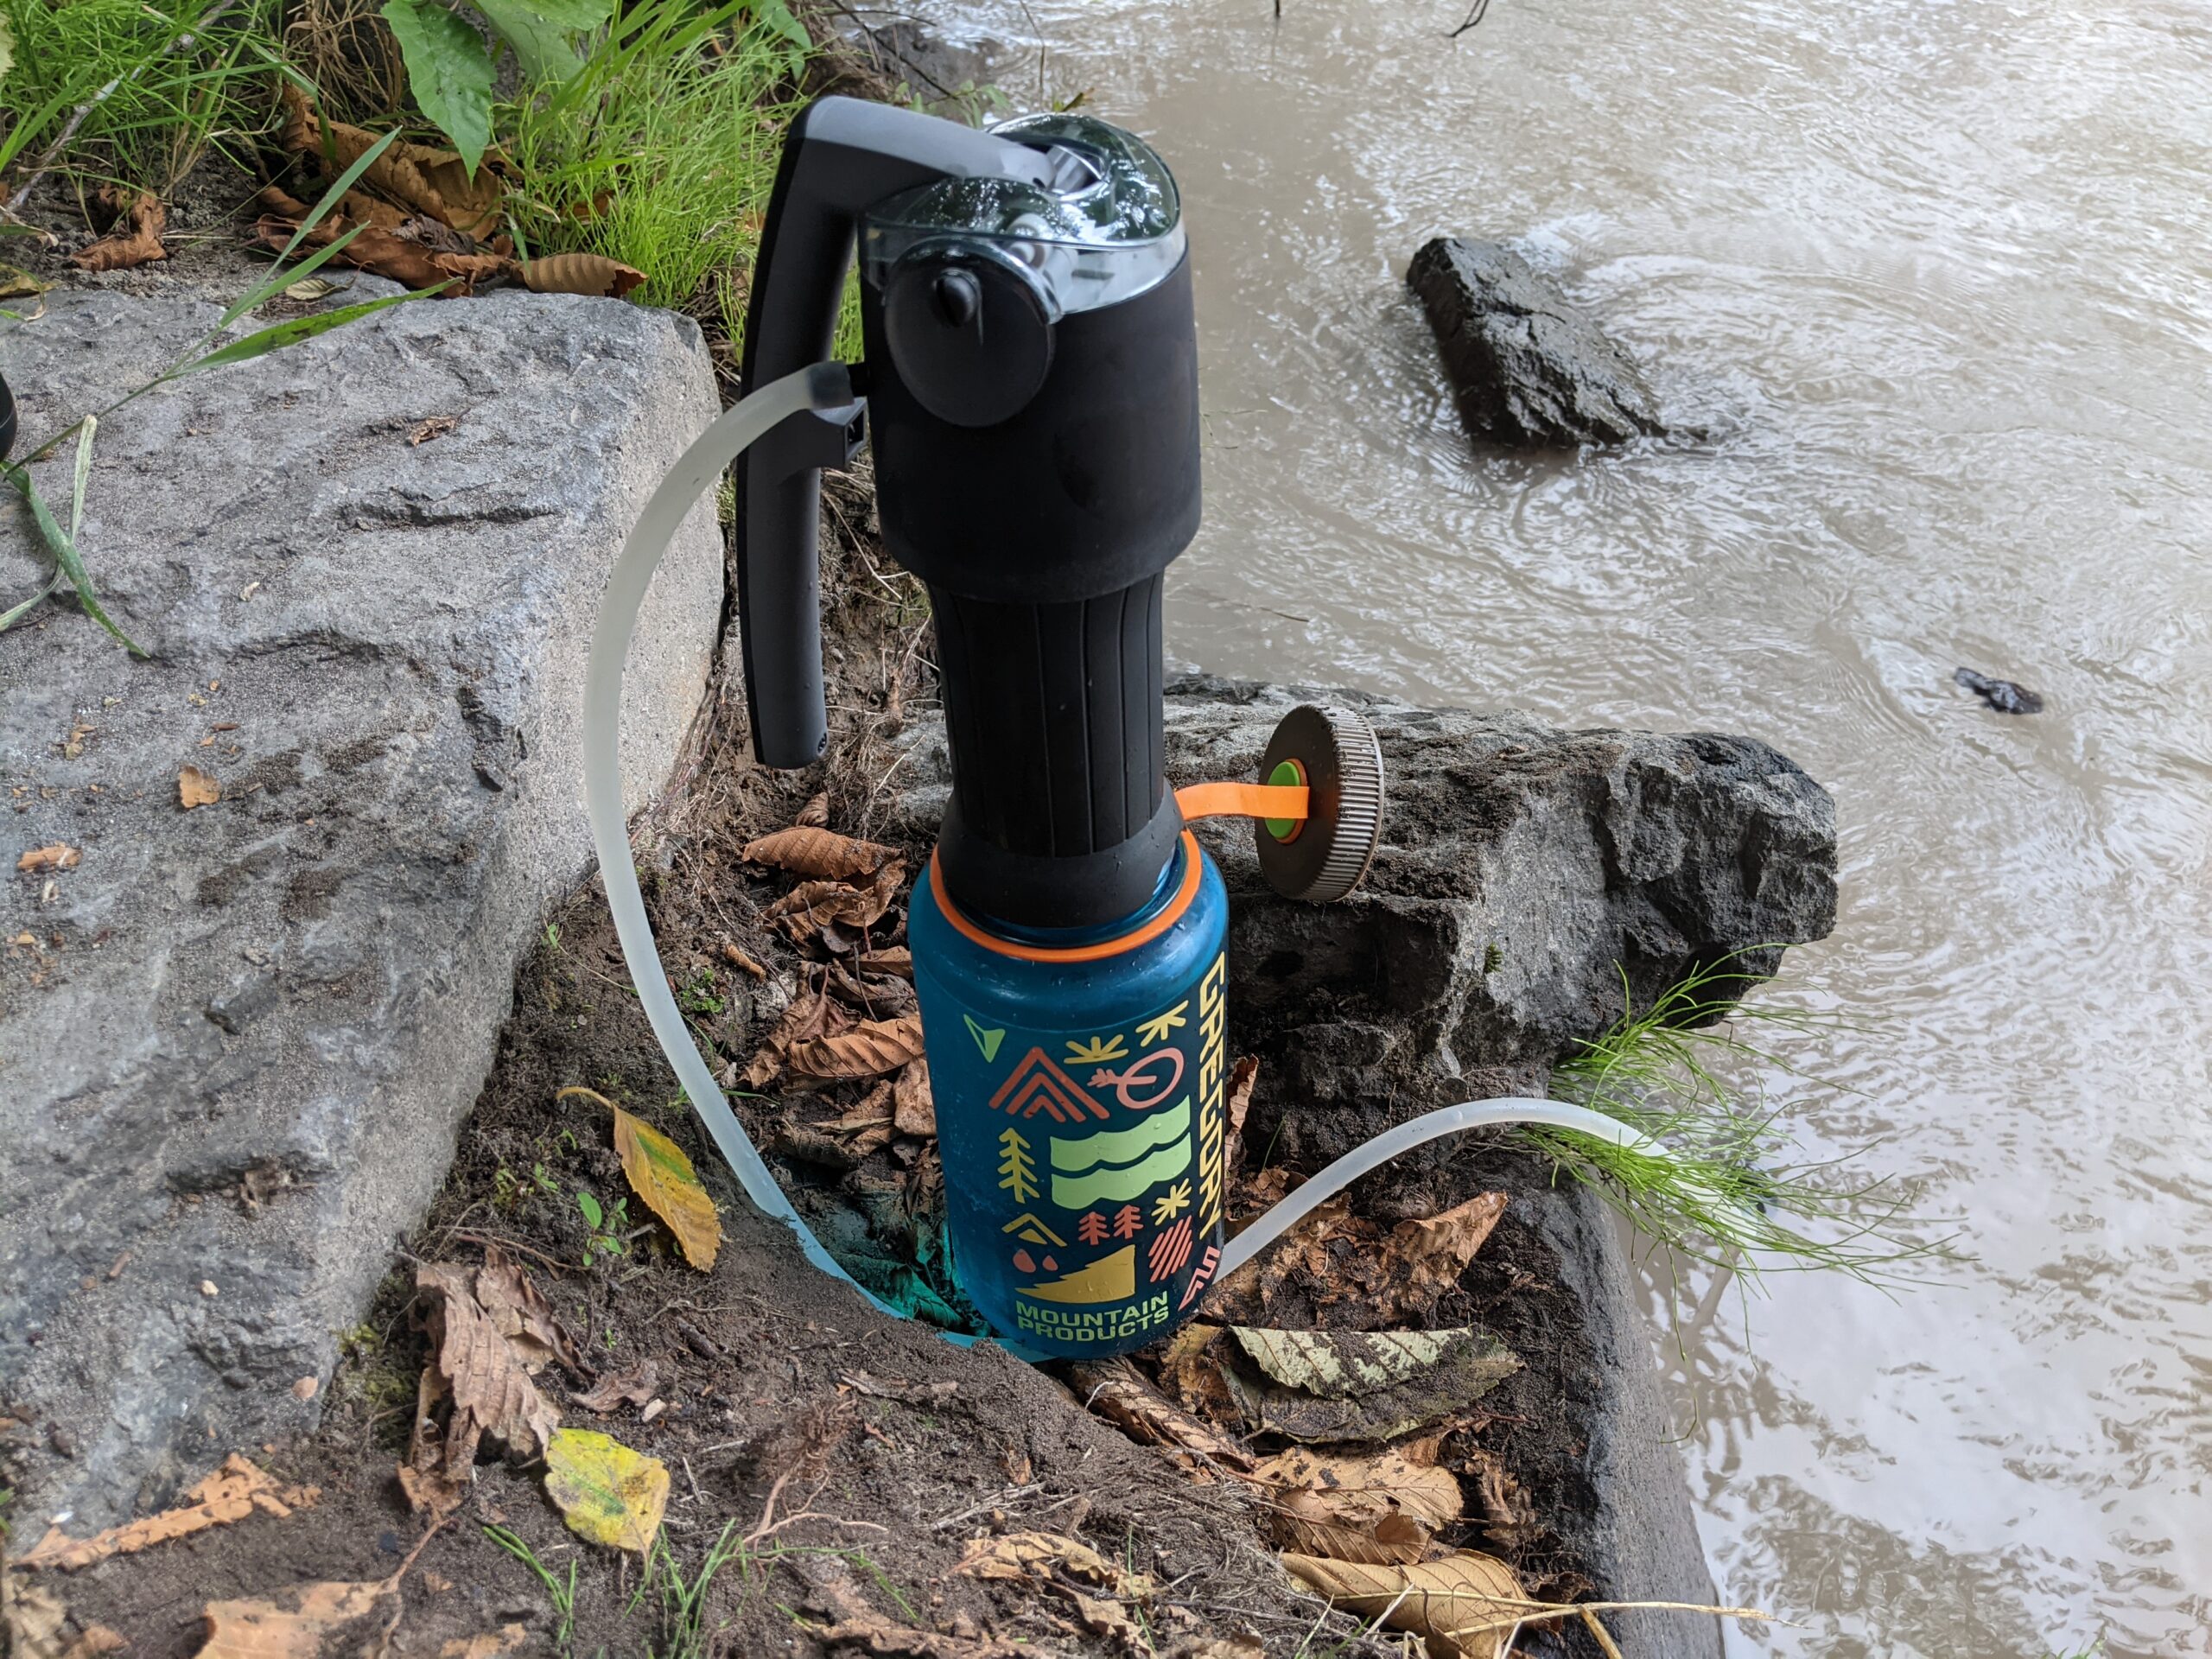 An Ultimate Lifestraw Review and 3 Safer Water Filters for Travel